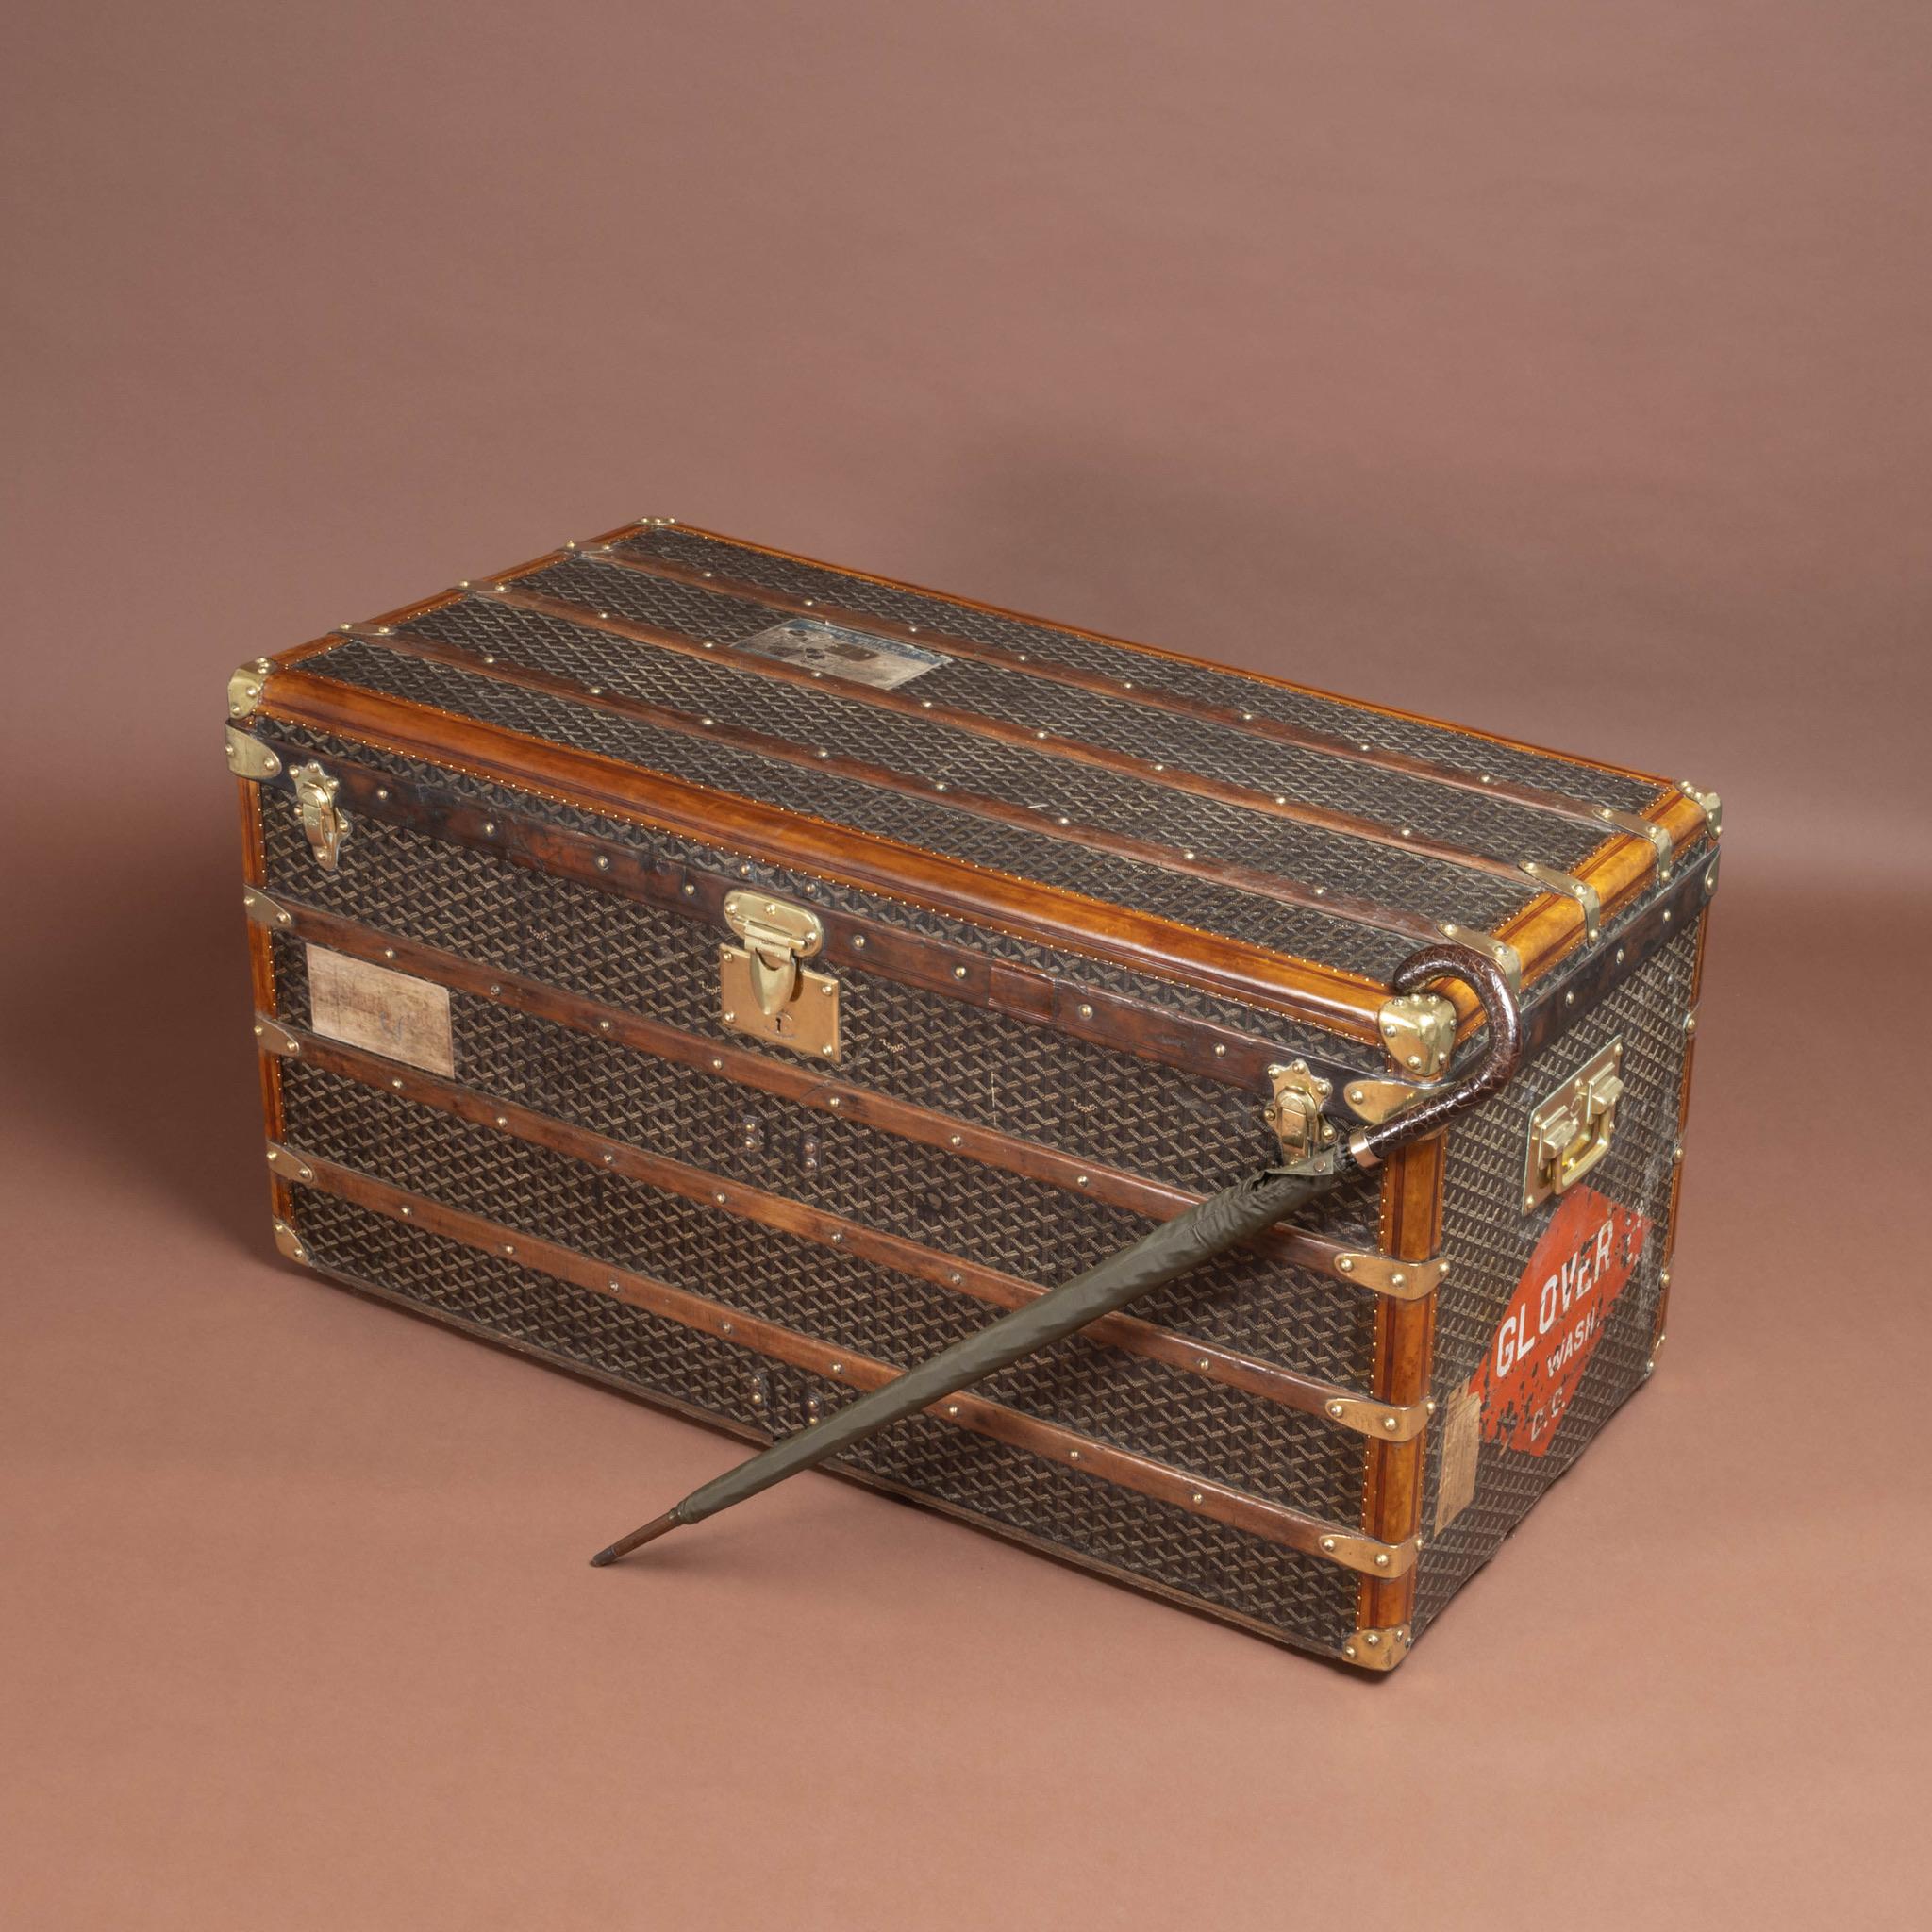 Large steamer trunk by Goyard in their signature 'Goyardine' chevron pattern canvas covering with polished brass lock, catches & handles; circa 1910. 

All of the leather trim on the trunk, except the front and one of the sides of the band that runs